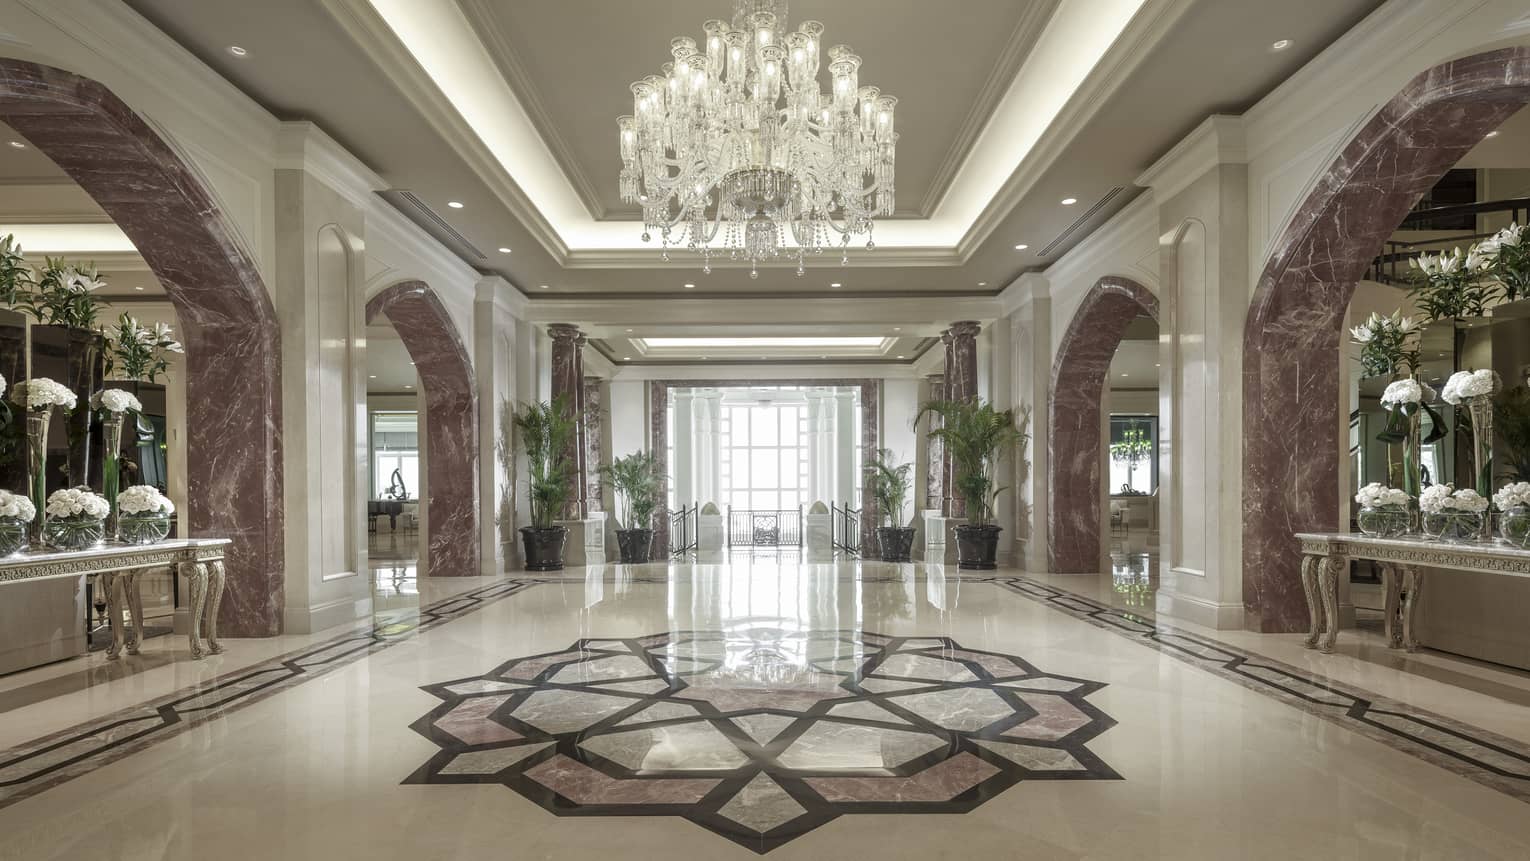 The marble lobby with a crystal chandelier above a mosaic.